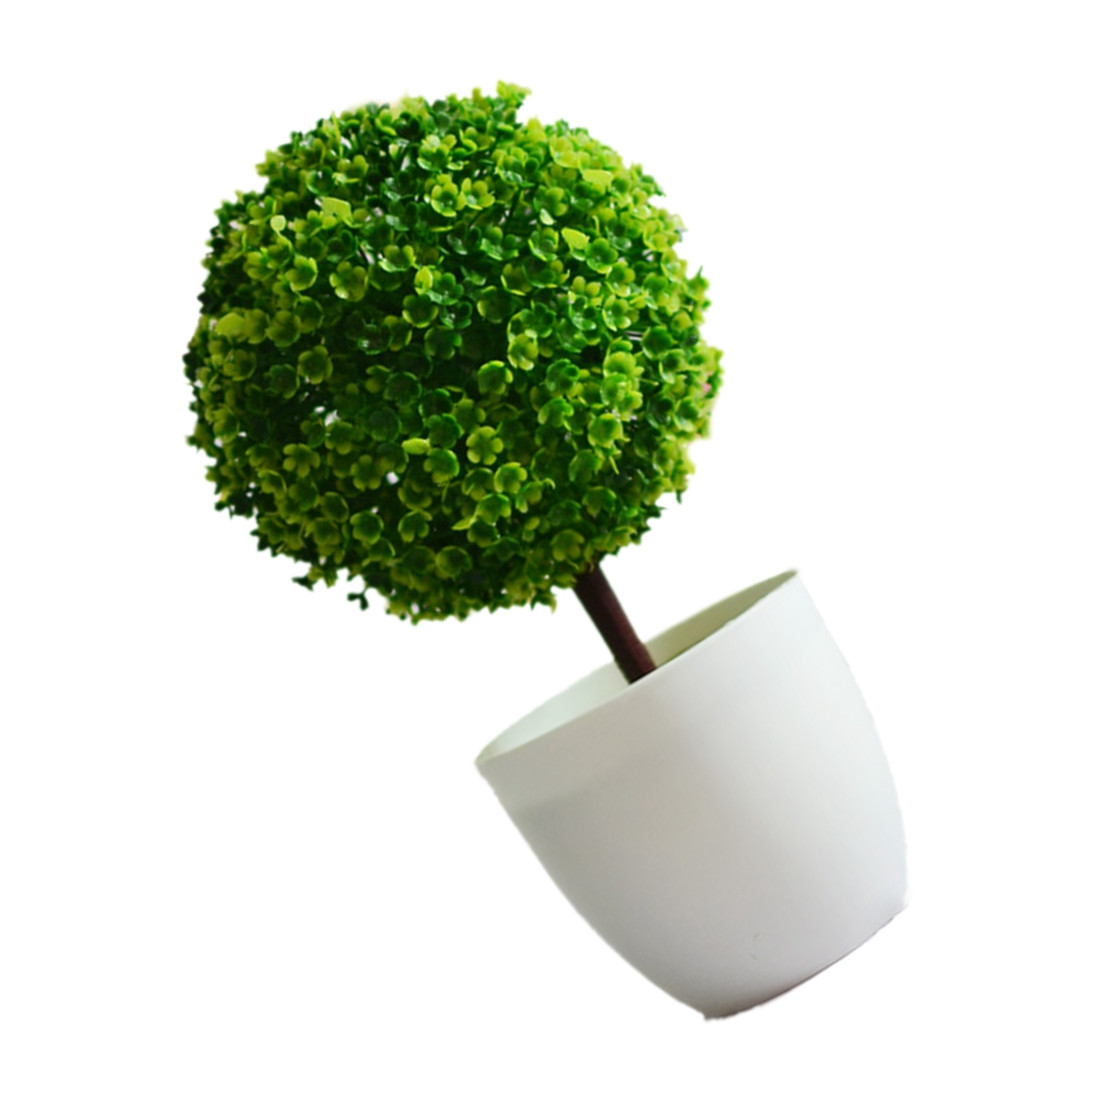 25 Wonderful Bonsai Tree Vase 2024 free download bonsai tree vase of best artificial plants ball bonsai can washes decorative green inside plants vase notelight shooting and different displays may cause the color of the item in the picture